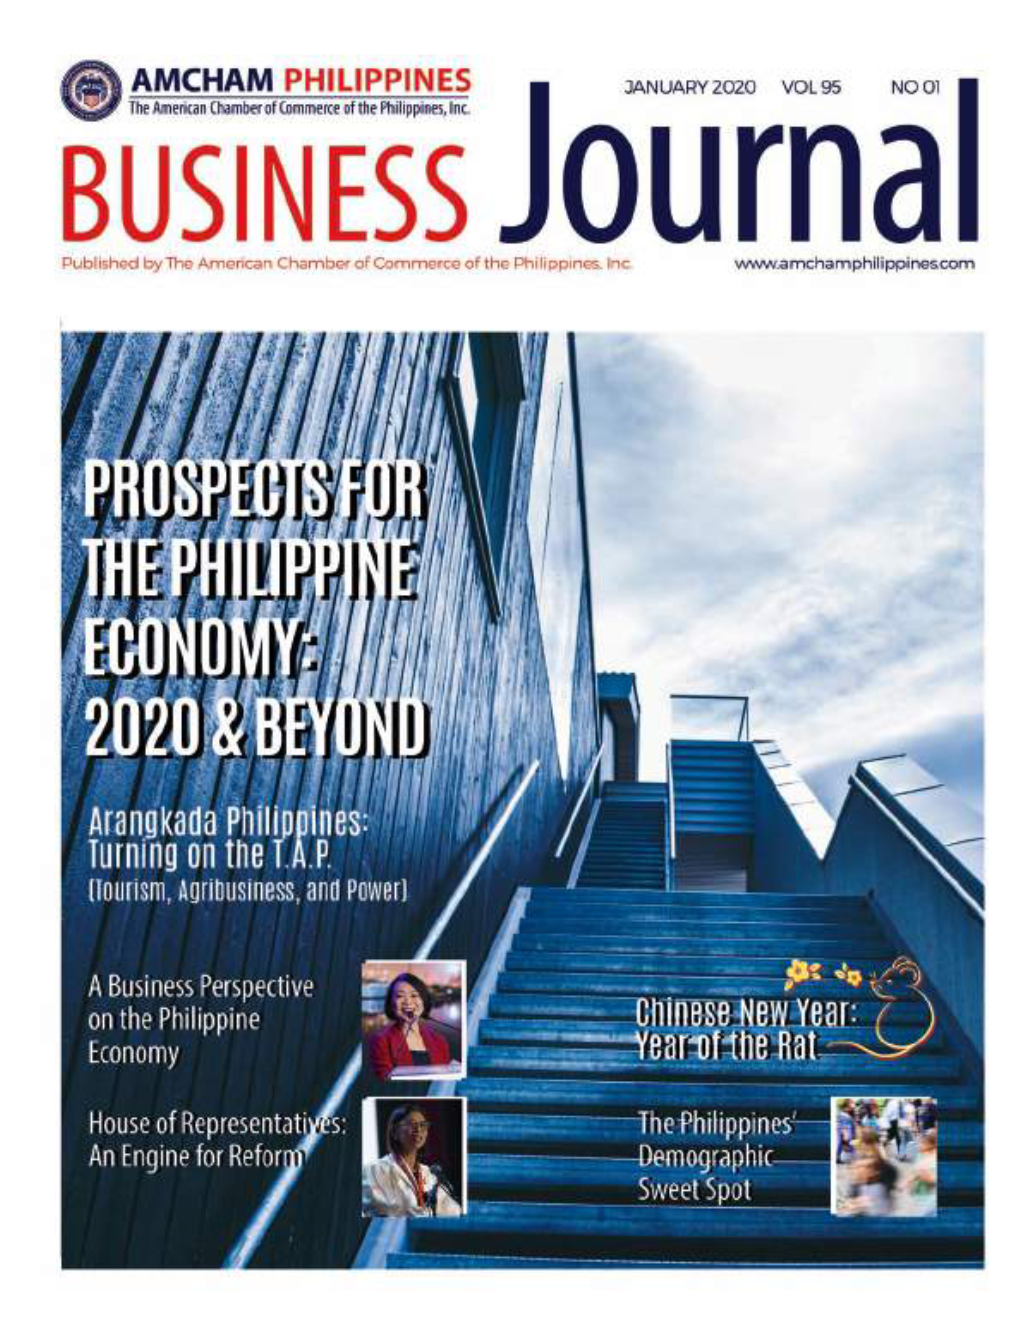 Prospects for the Philippine Economy: 2020 & Beyond (01/14) Equity Compensation for U.S